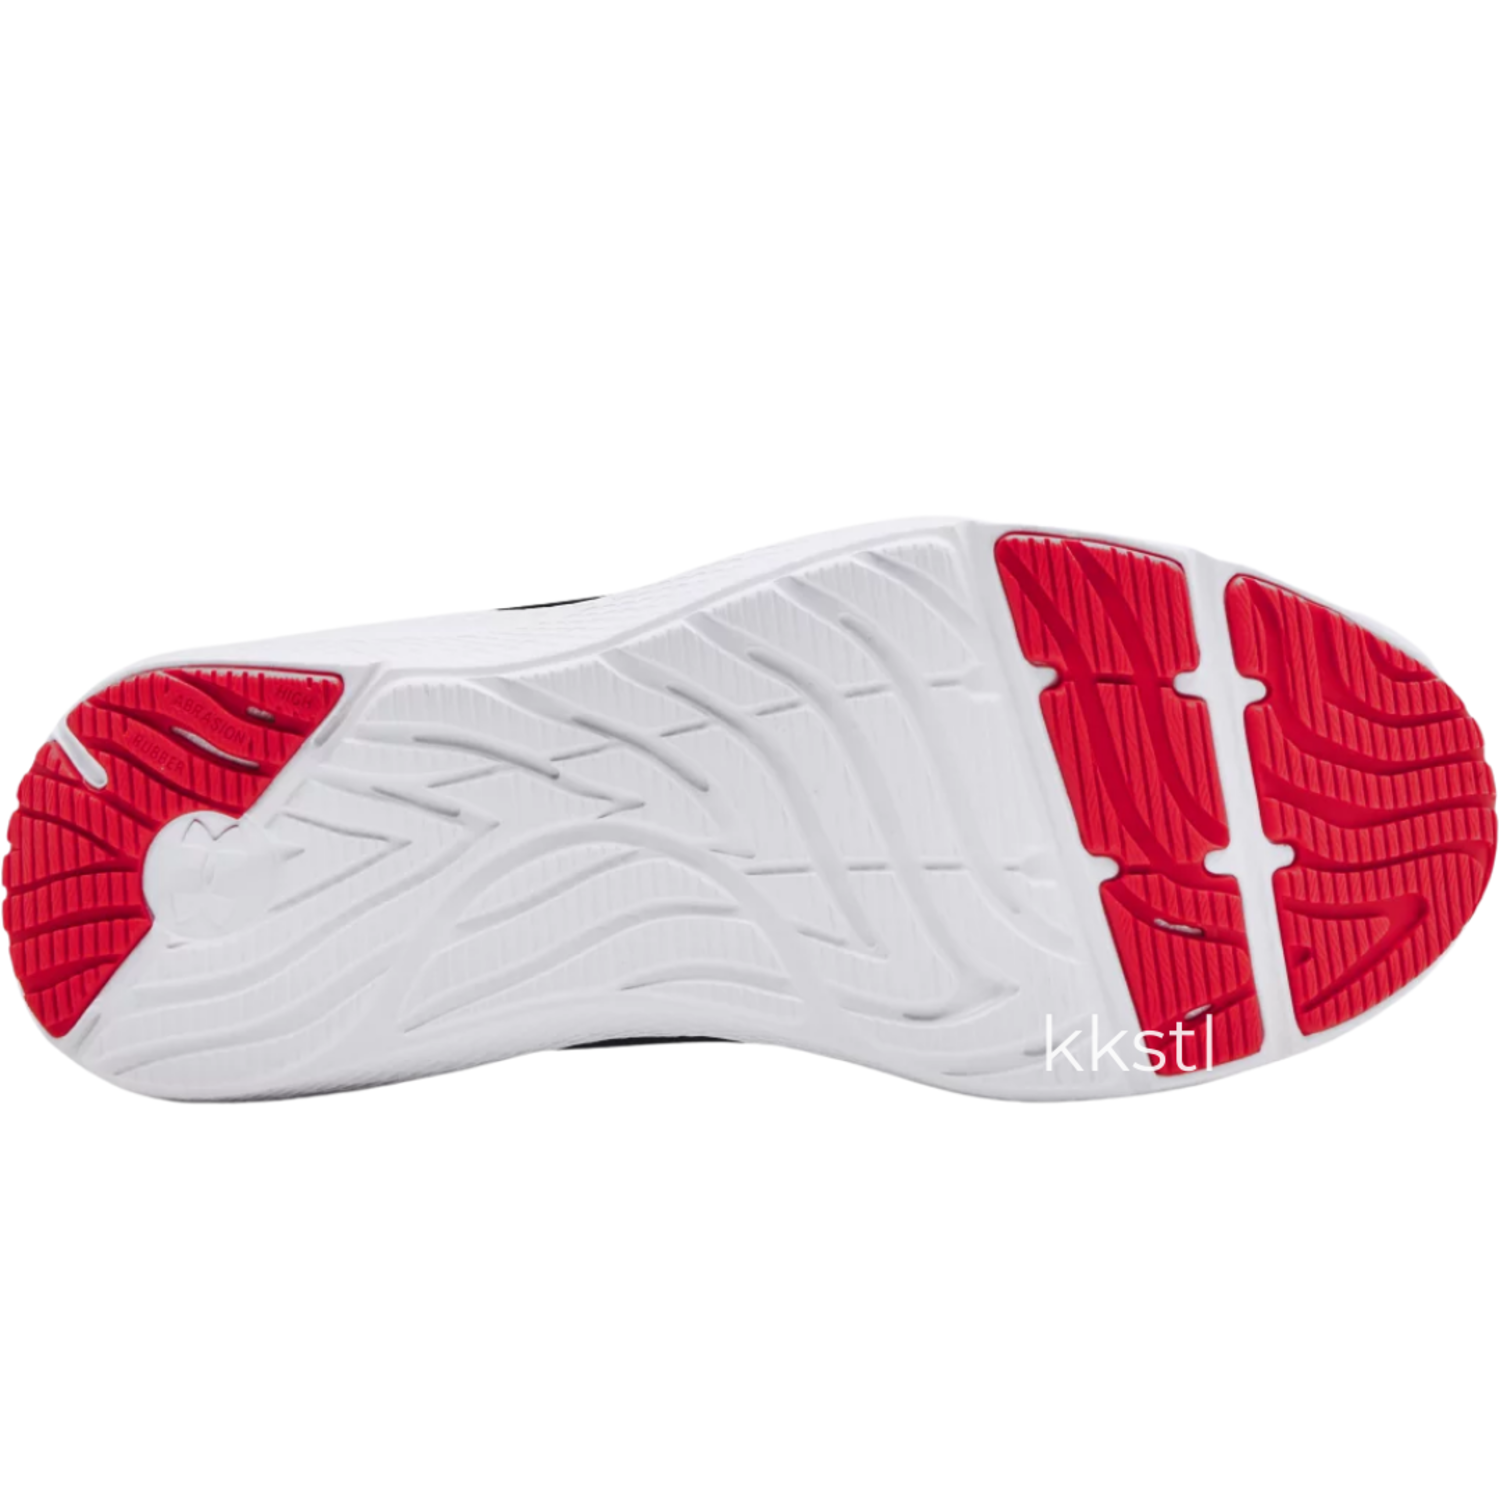 Under Armour GS Charged Pursuit 2 BL 001 - Kids Shoes in Canada